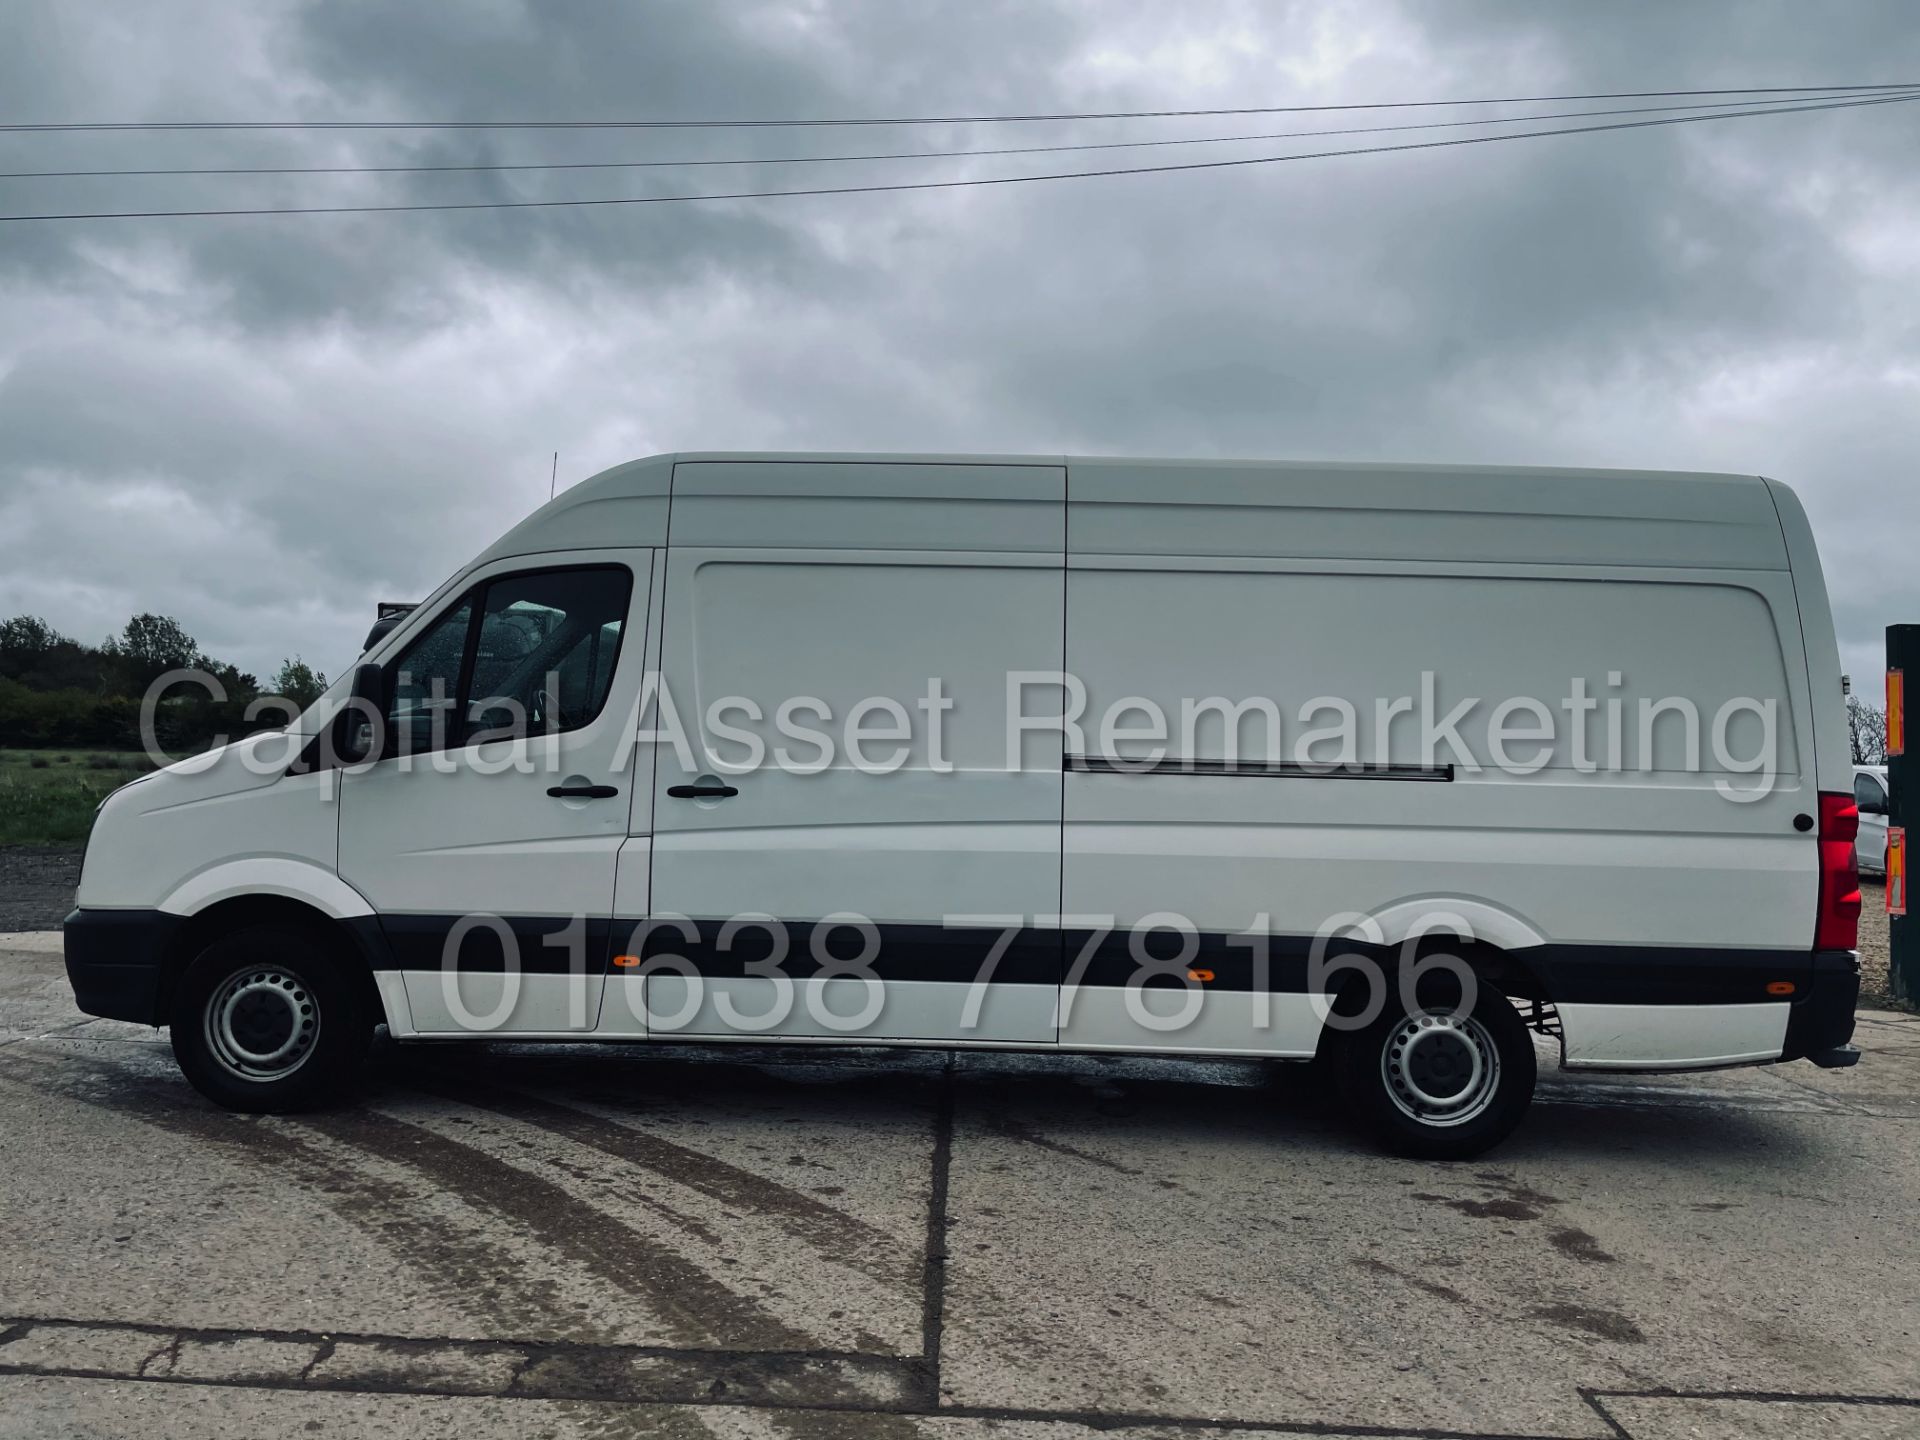 (On Sale) VOLKSWAGEN CRAFTER *LWB HI-ROOF* (2017 - EURO 6) '2.0 TDI BMT - 6 SPEED' *CRUISE CONTROL* - Image 8 of 39